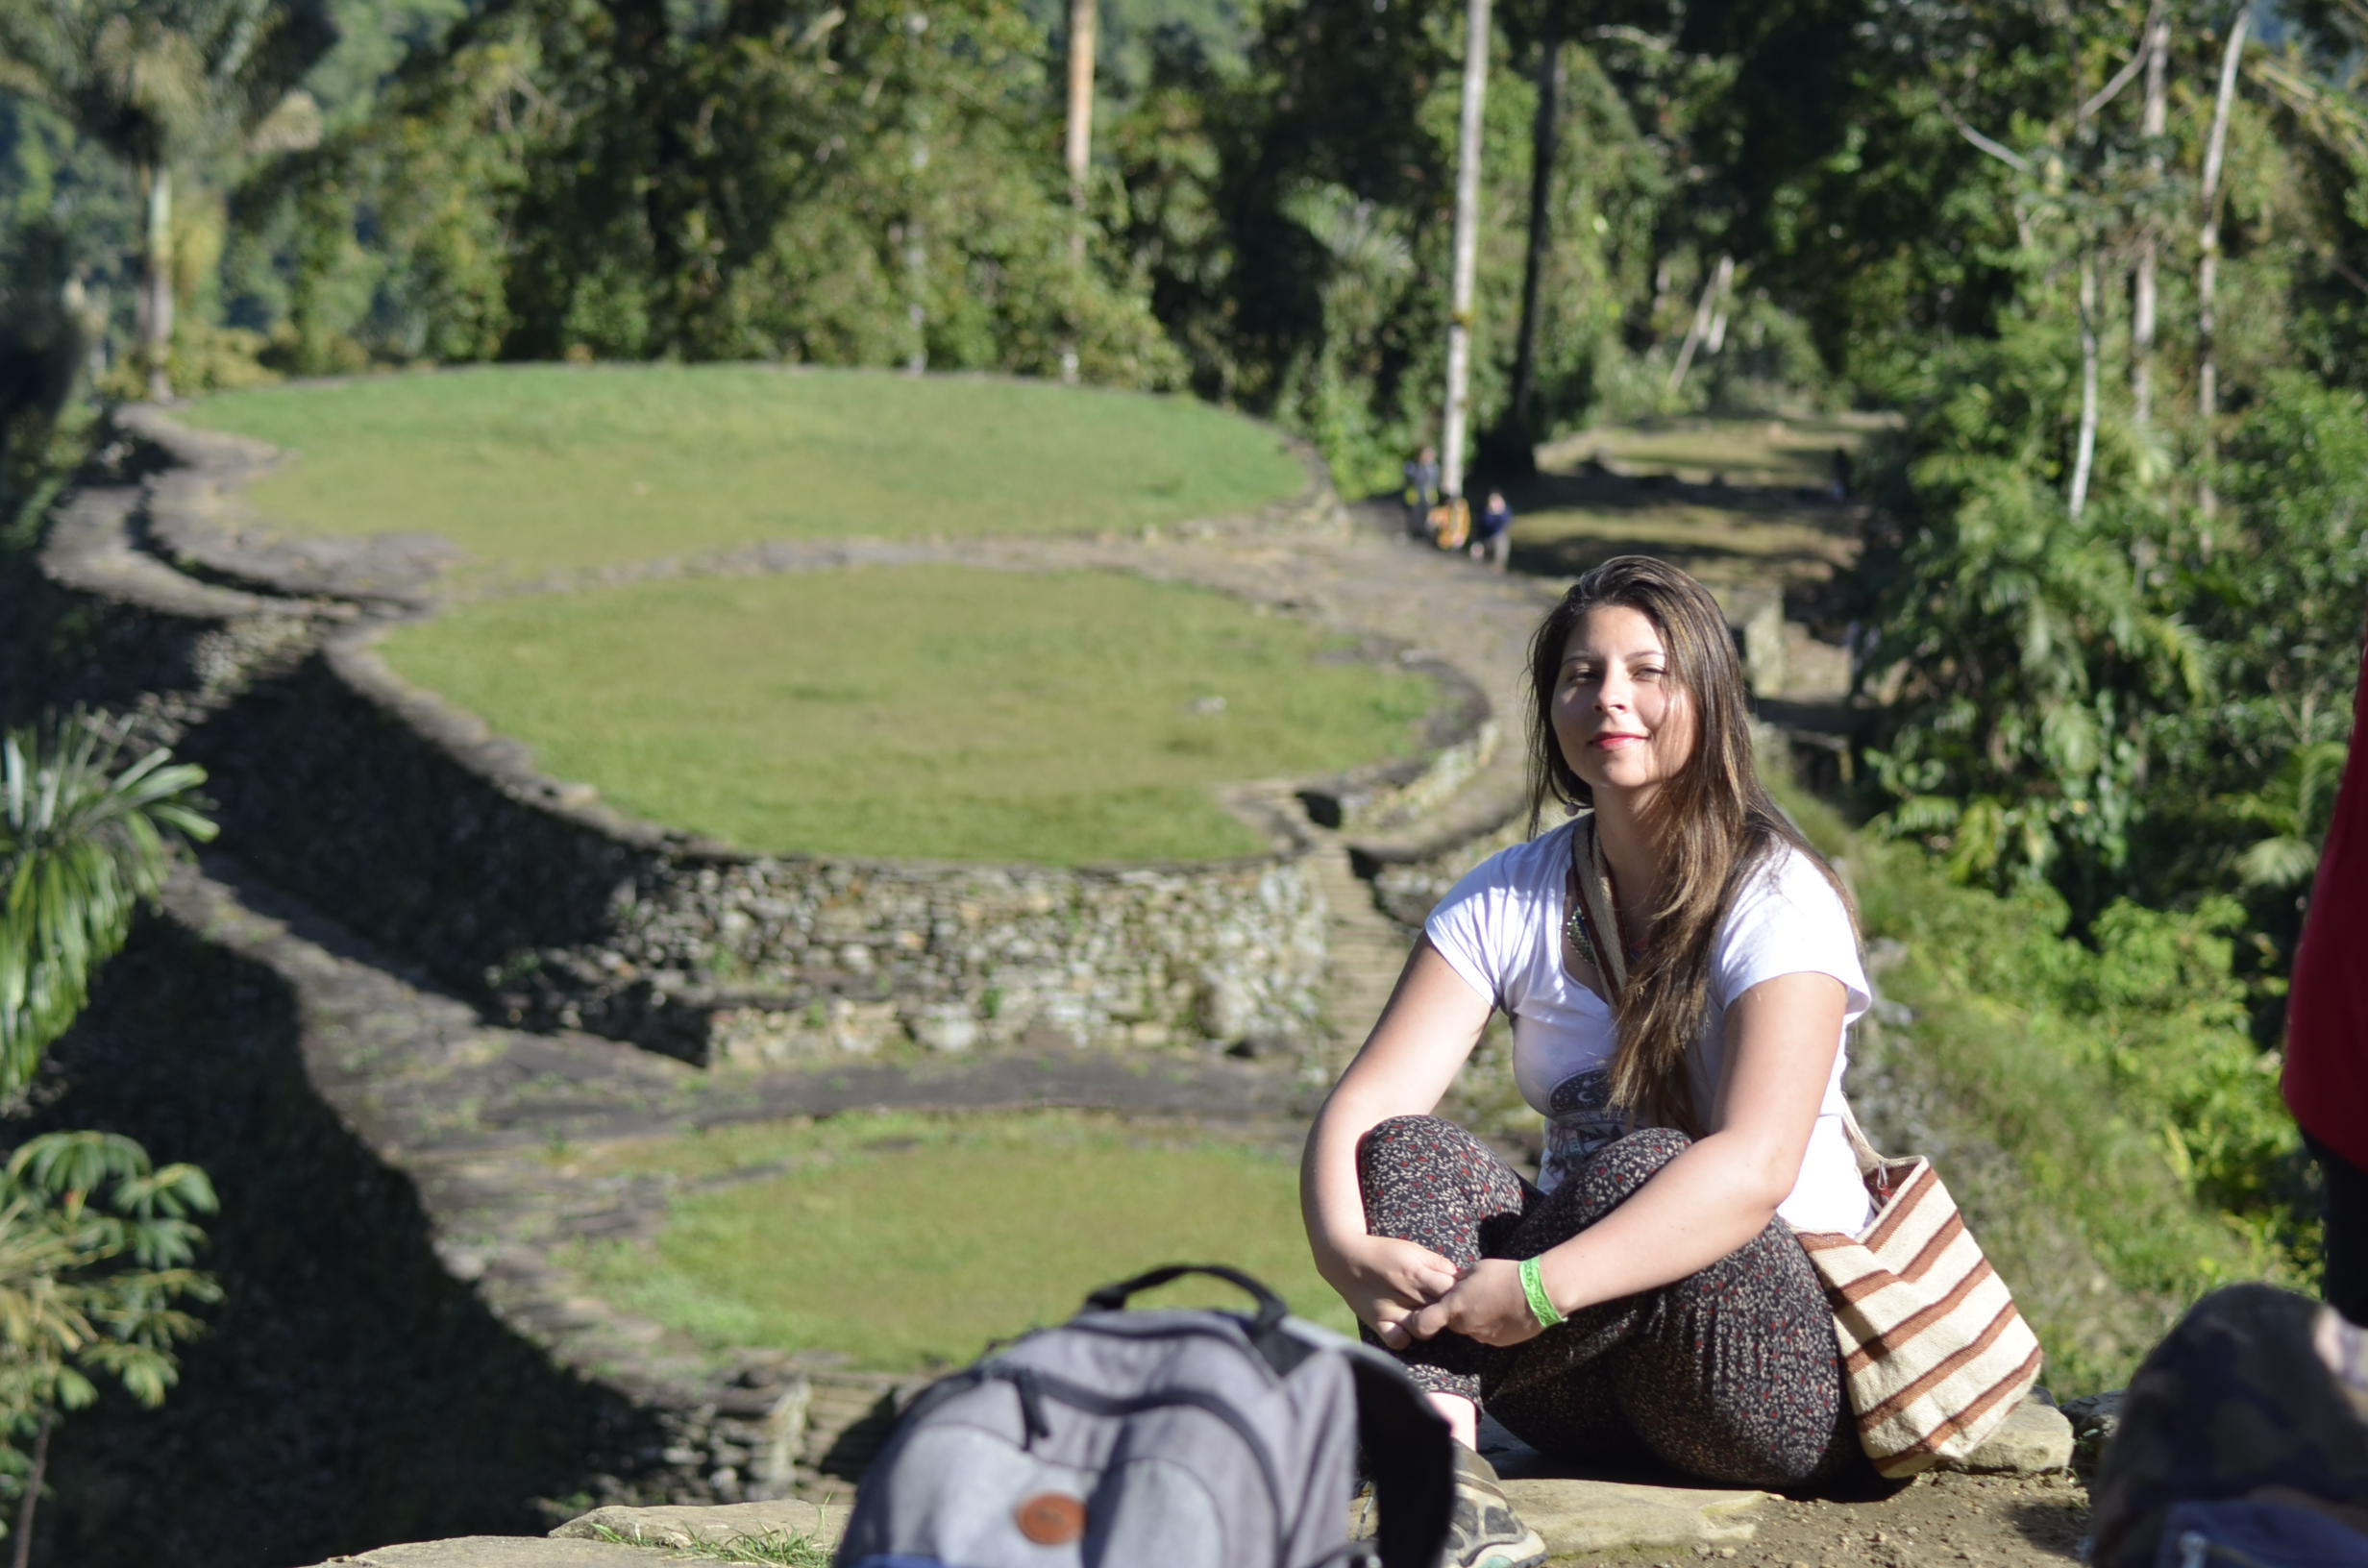 Then, you cannot miss the opportunity to visit Ciudad Perdida, the archaeological treasure of the Taironas in the Sierra Nevada de Santa Marta.